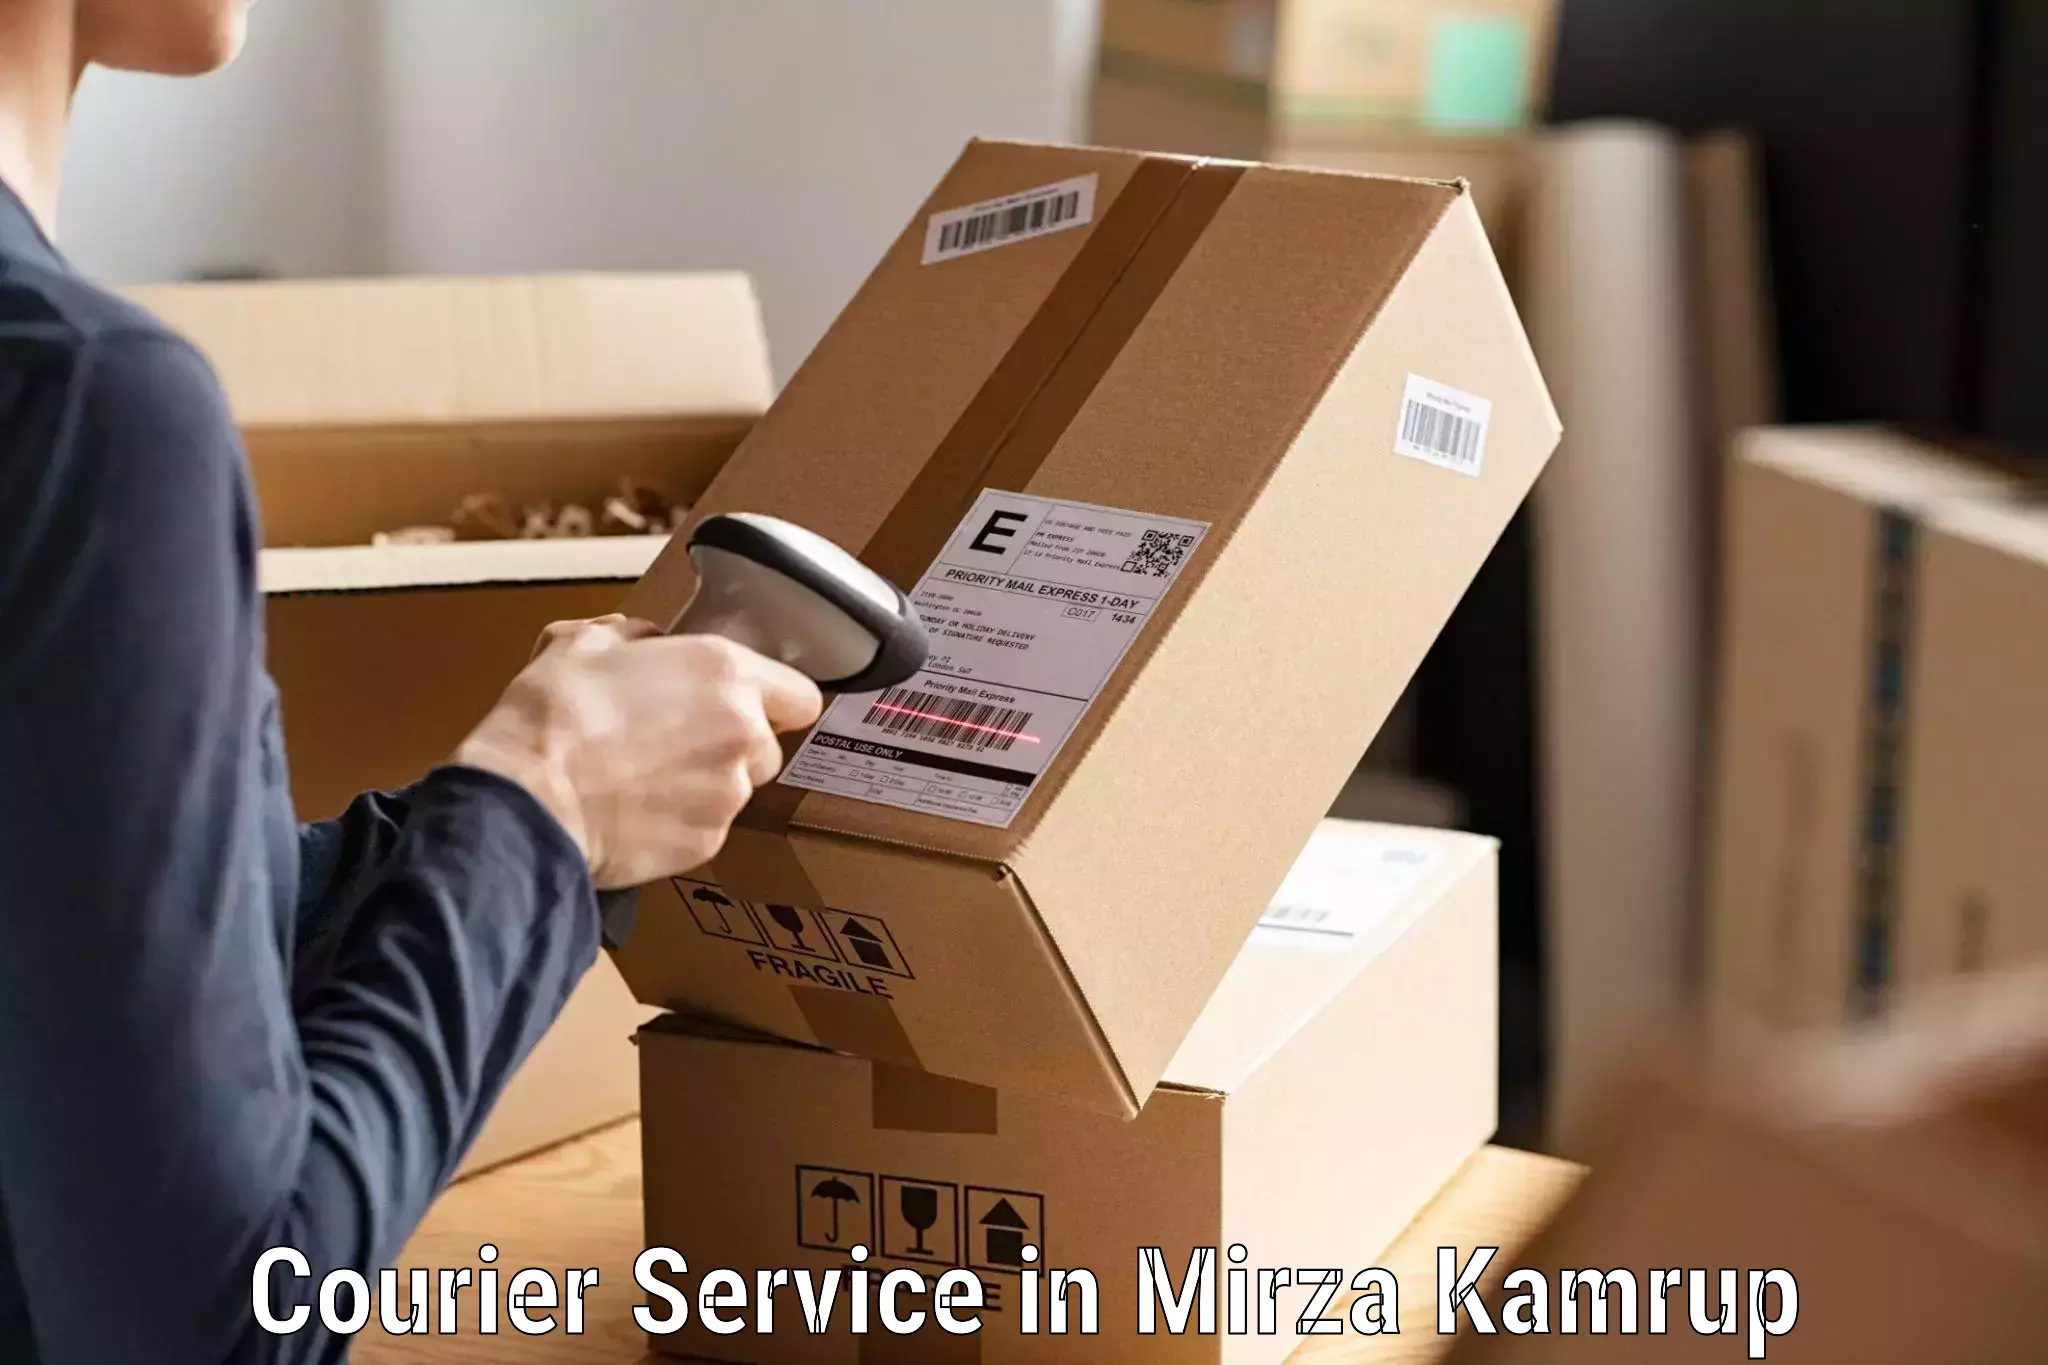 Parcel handling and care in Mirza Kamrup